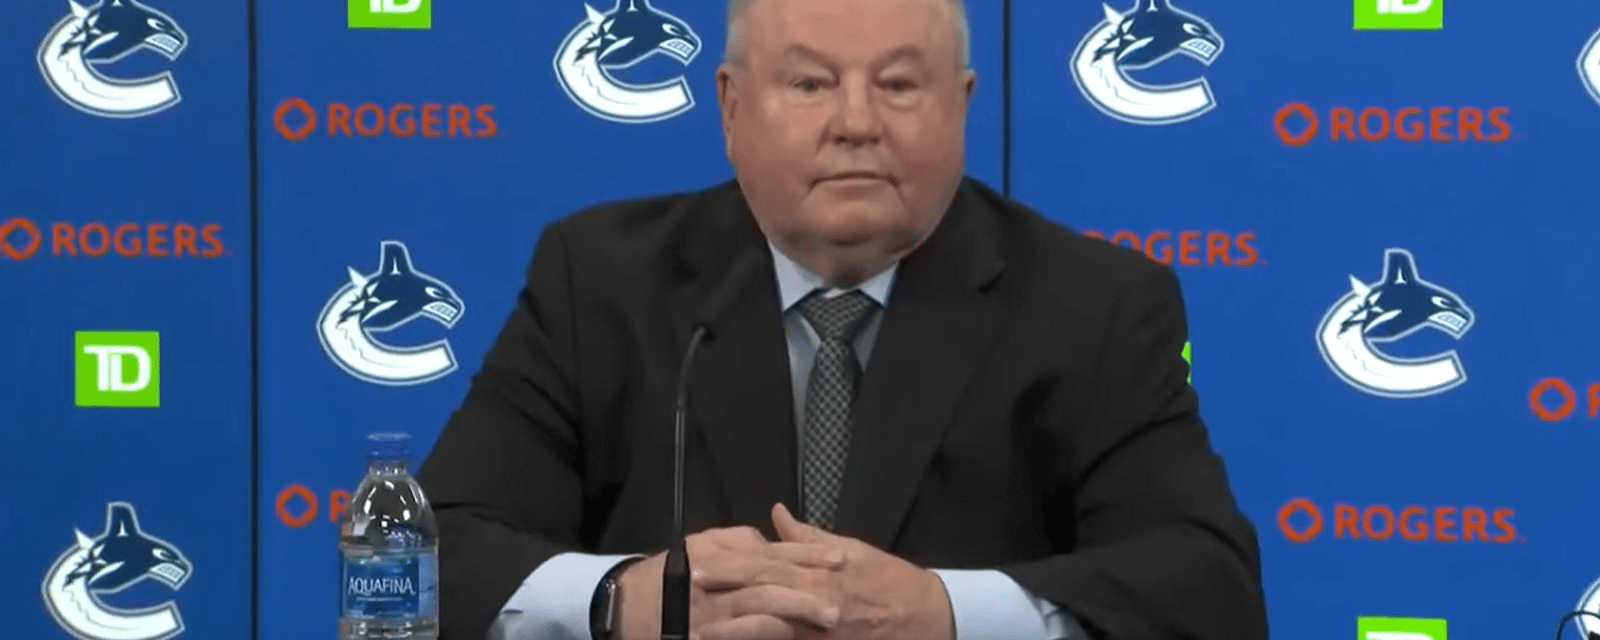 Bruce Boudreau throws Canucks management under the bus.